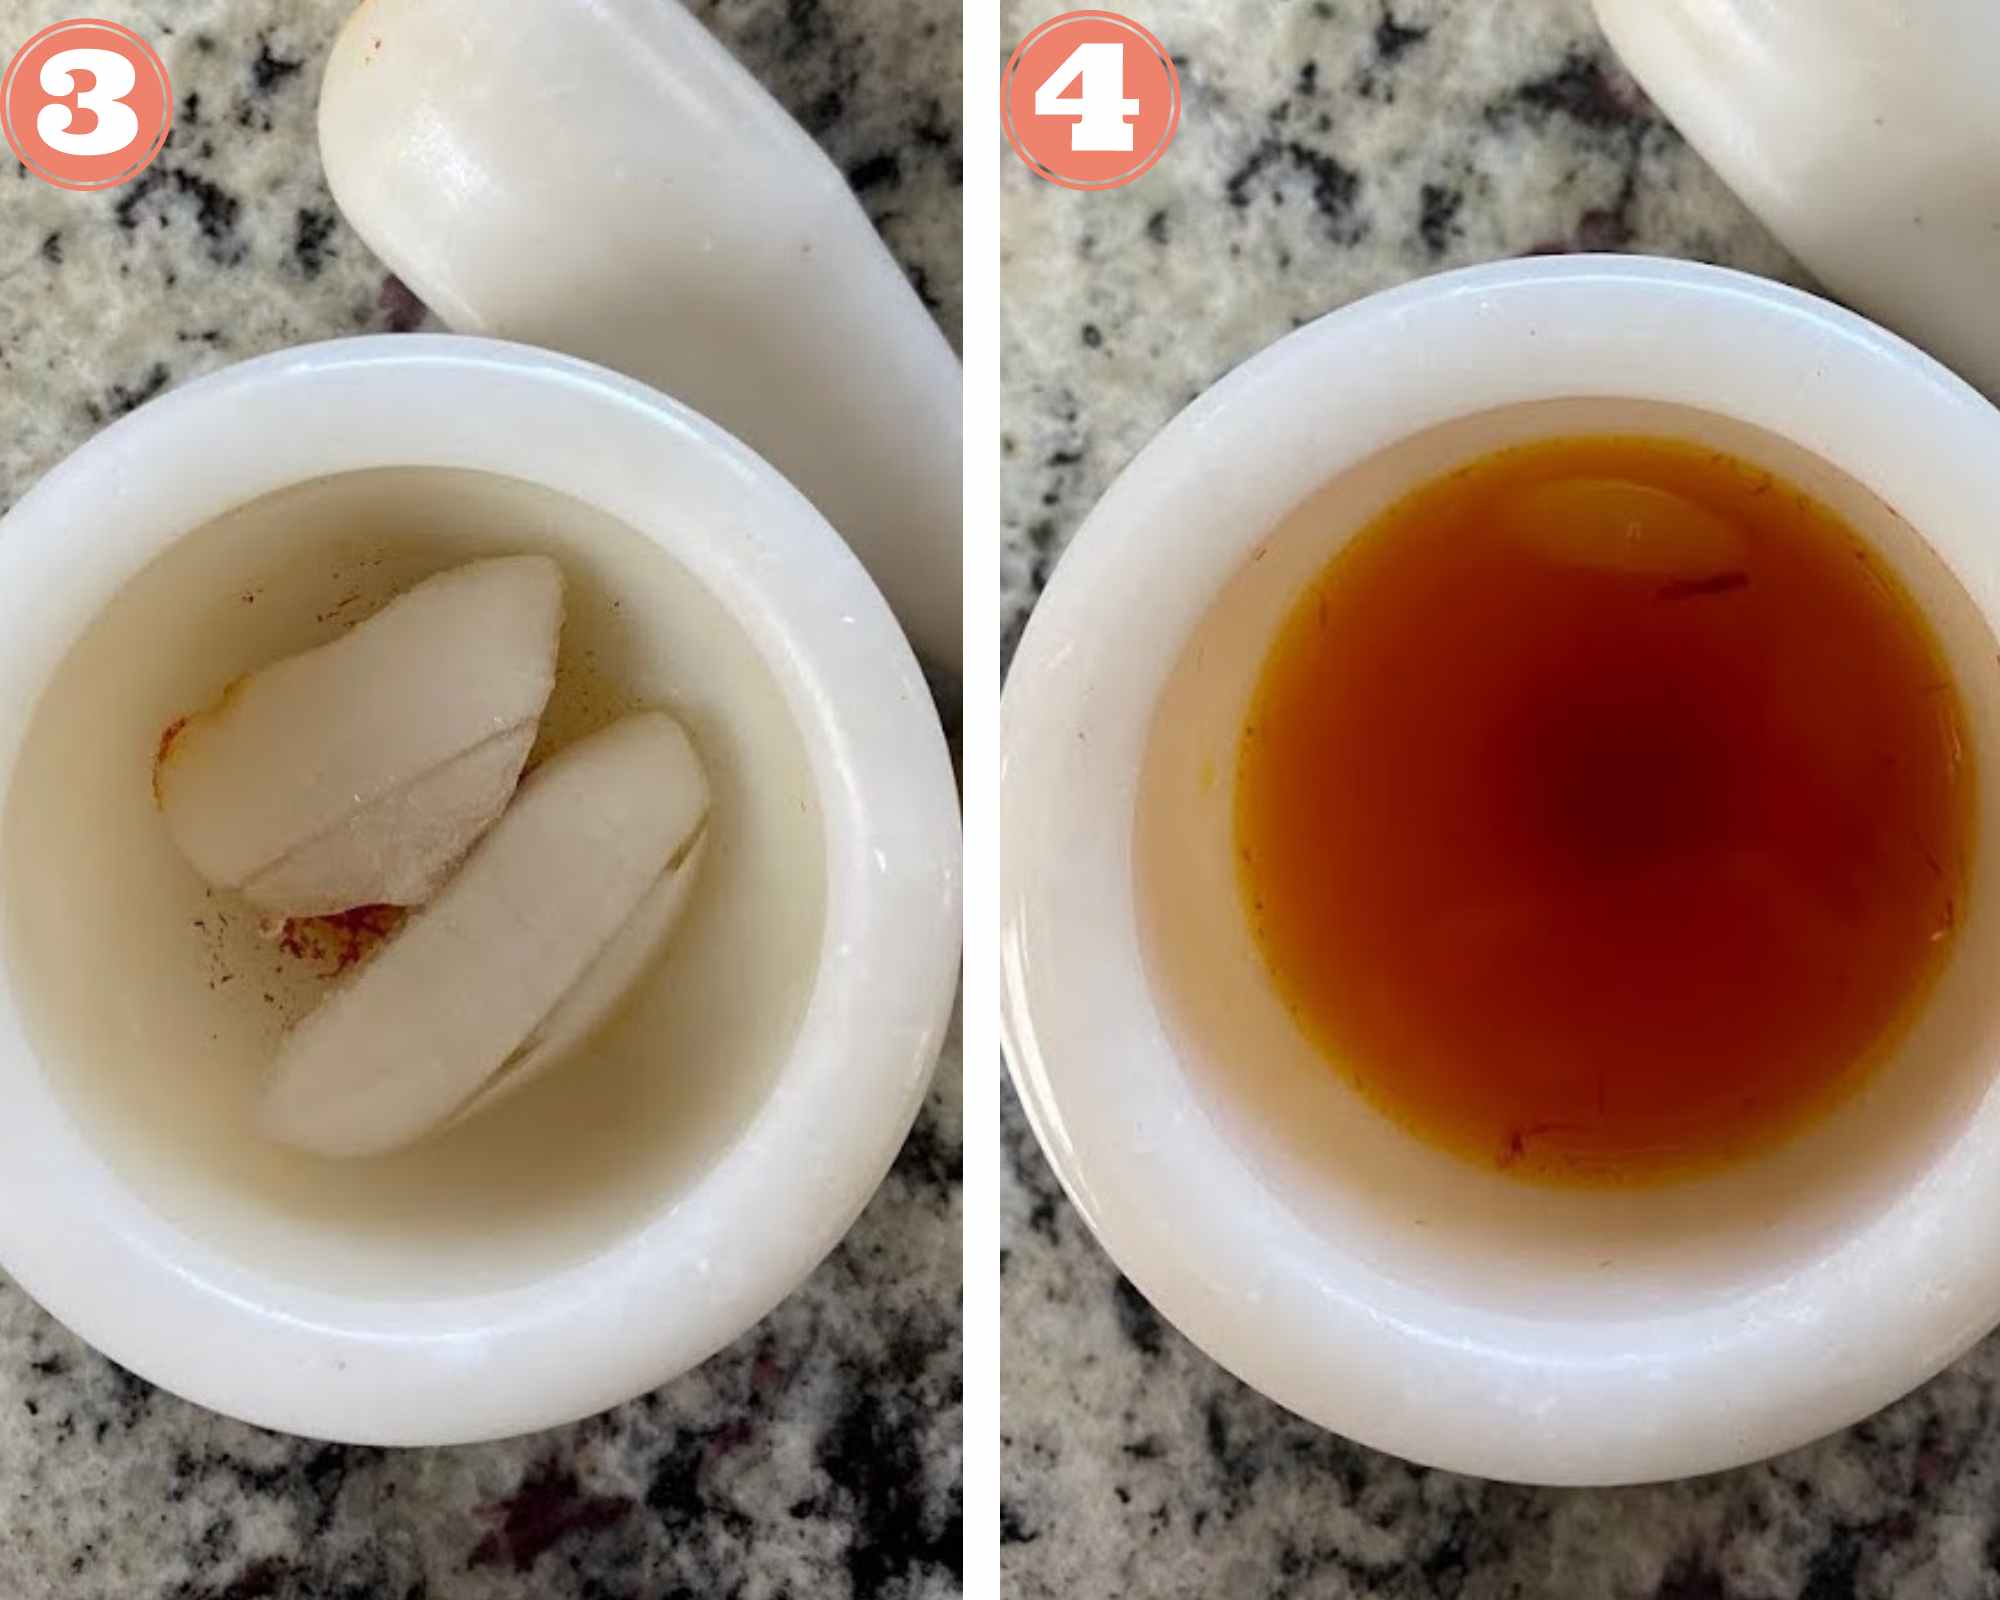 Steps to extract flavor and color from saffron using a mortar pestle.